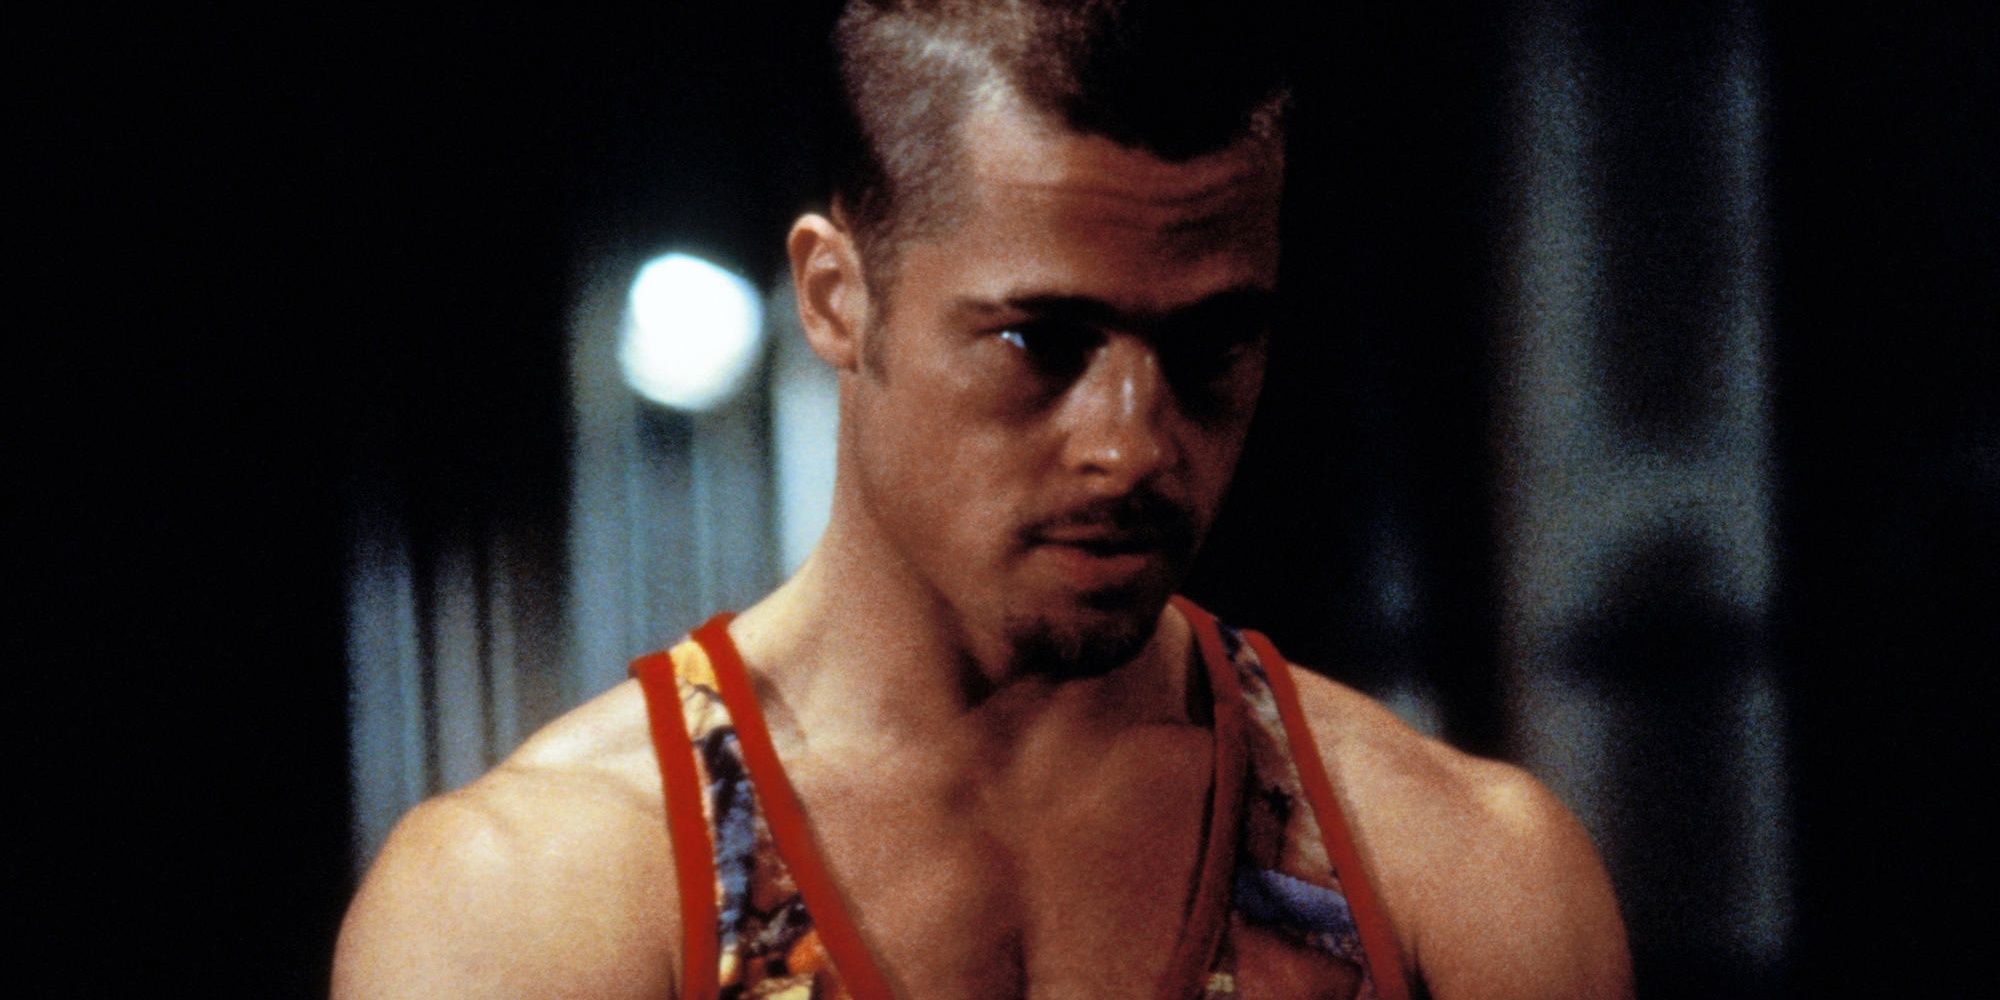 Tyler Durden in a tank top at the end of Fight Club.